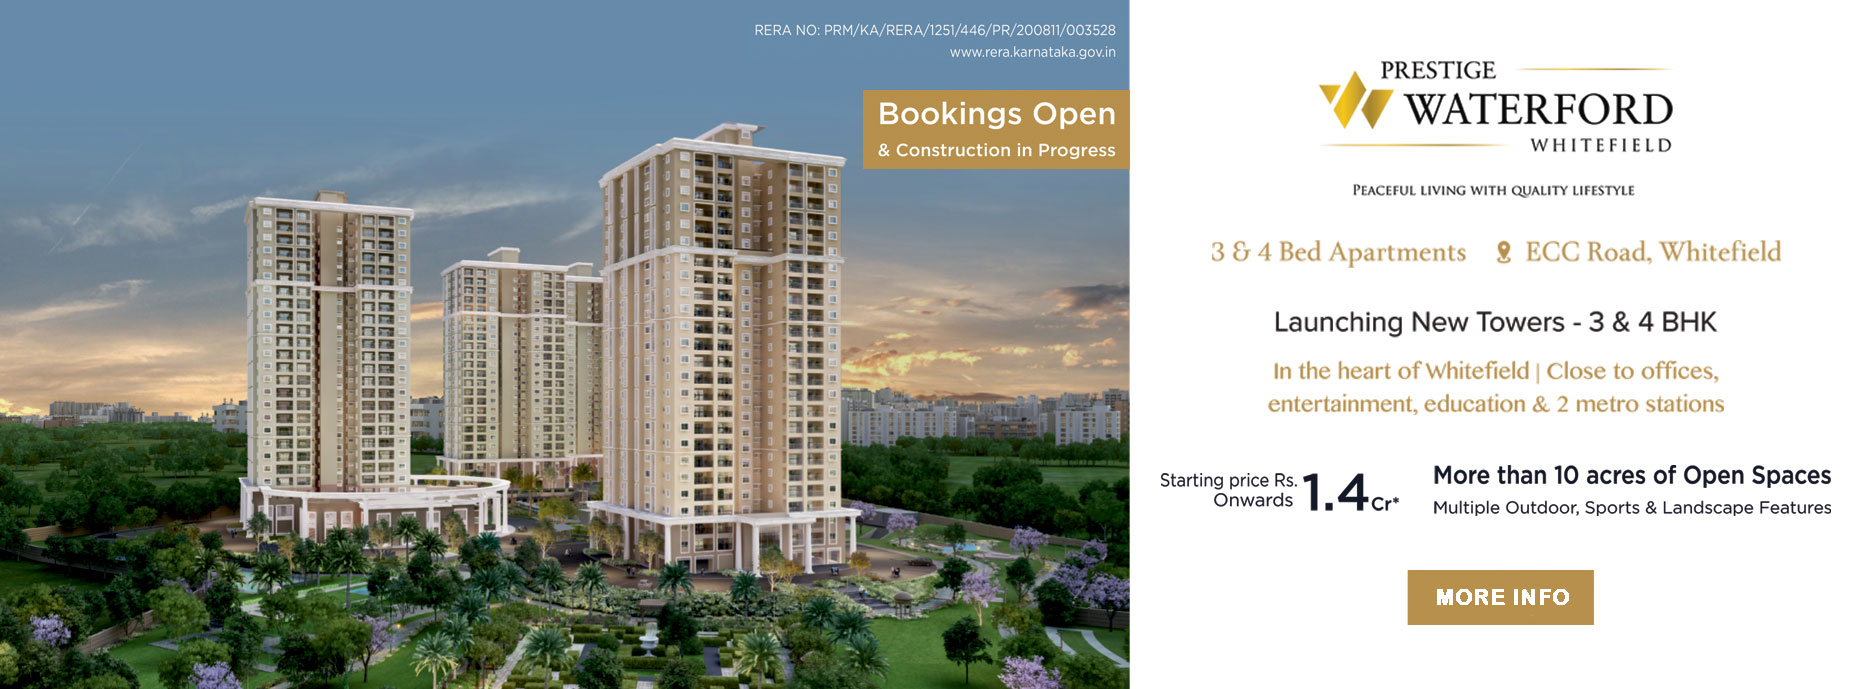 Bookings open & construction in progress at Prestige Waterford, Bangalore